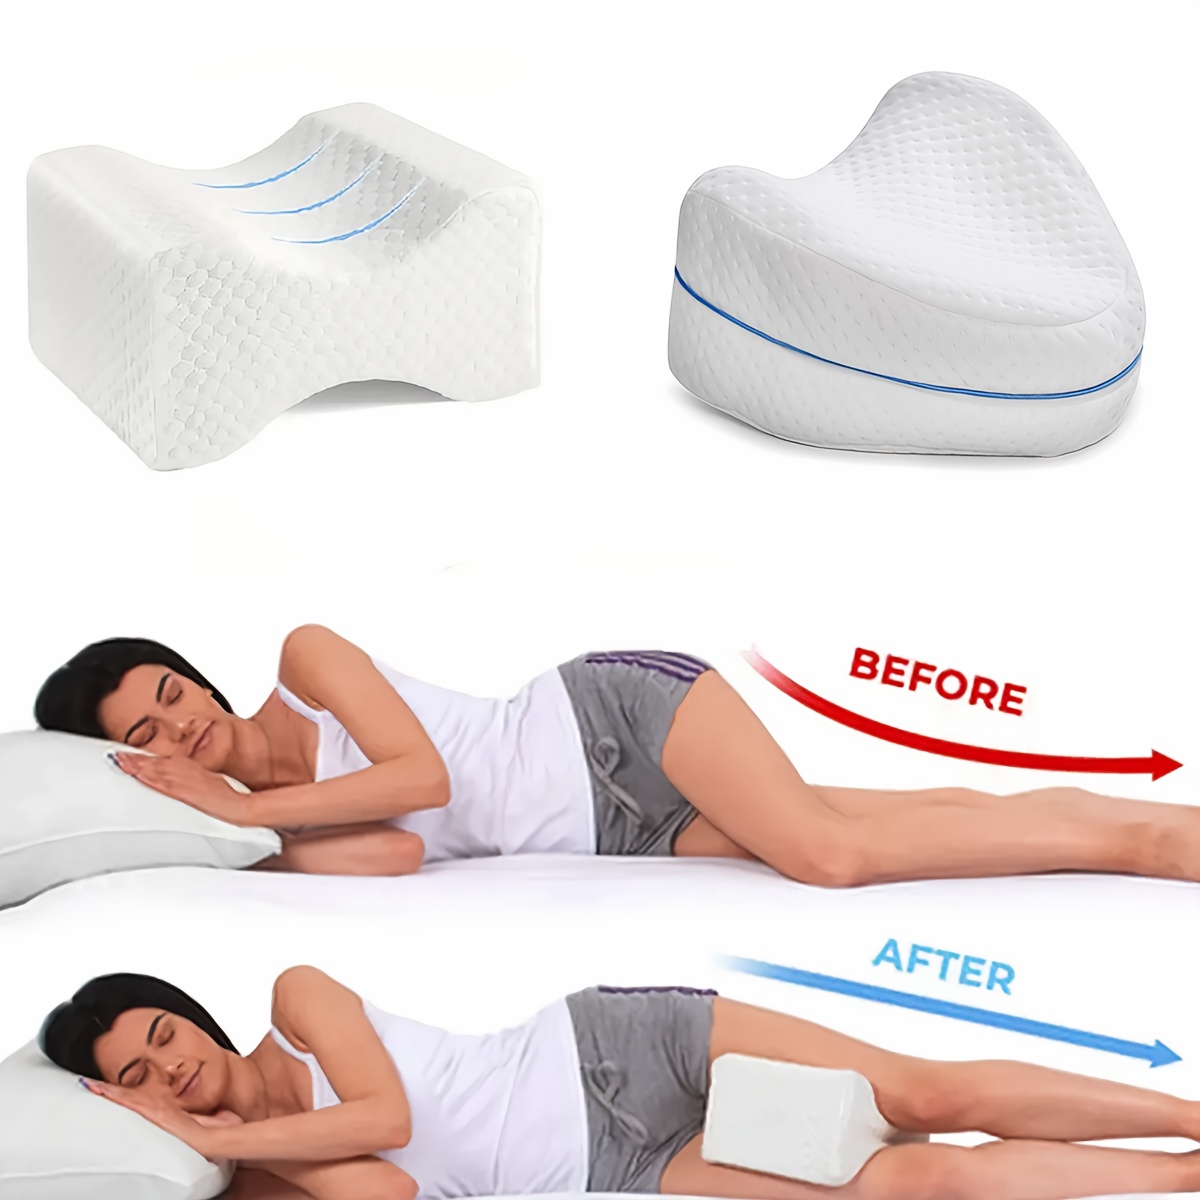 Knee Pillow For Sleeping On Side, Orthopedic Leg Pillow, Helps  Circulation & Alignment, For Sciatica Nerve Relief, Back, Knee, Hip, Neck,  Joint Pai